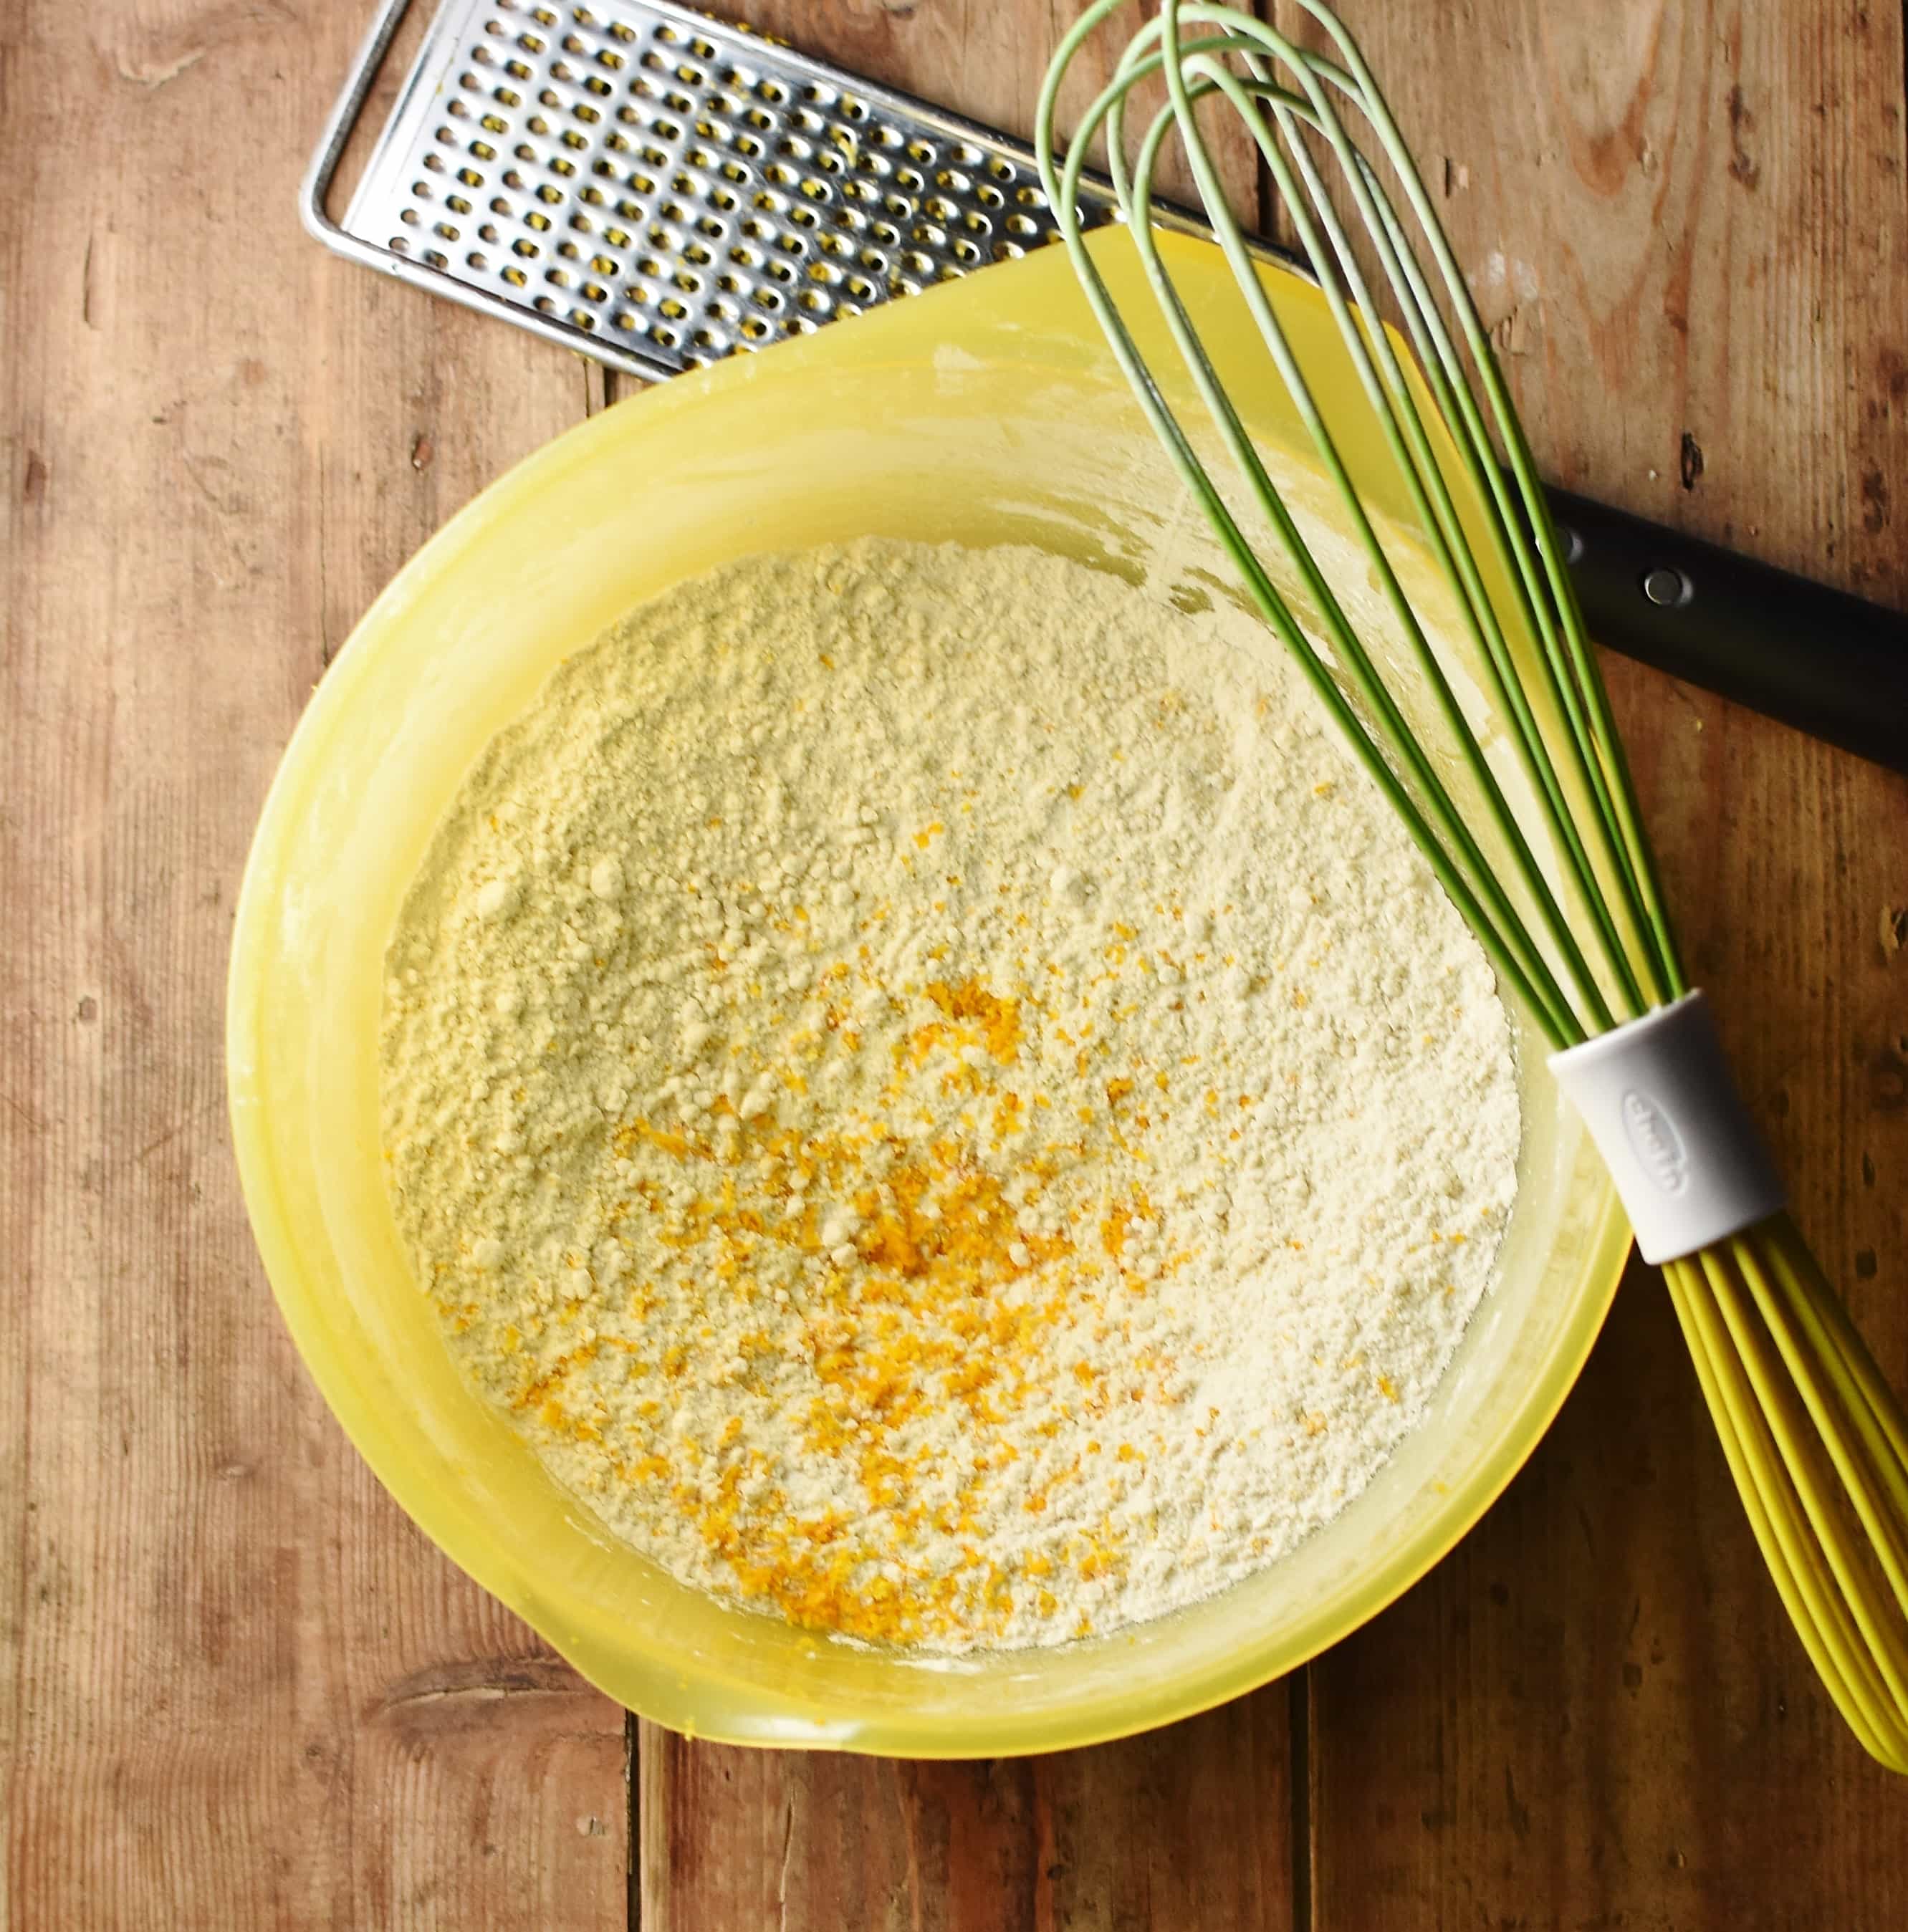 Flour mixture and orange zest in large yellow bowl with green whisk.